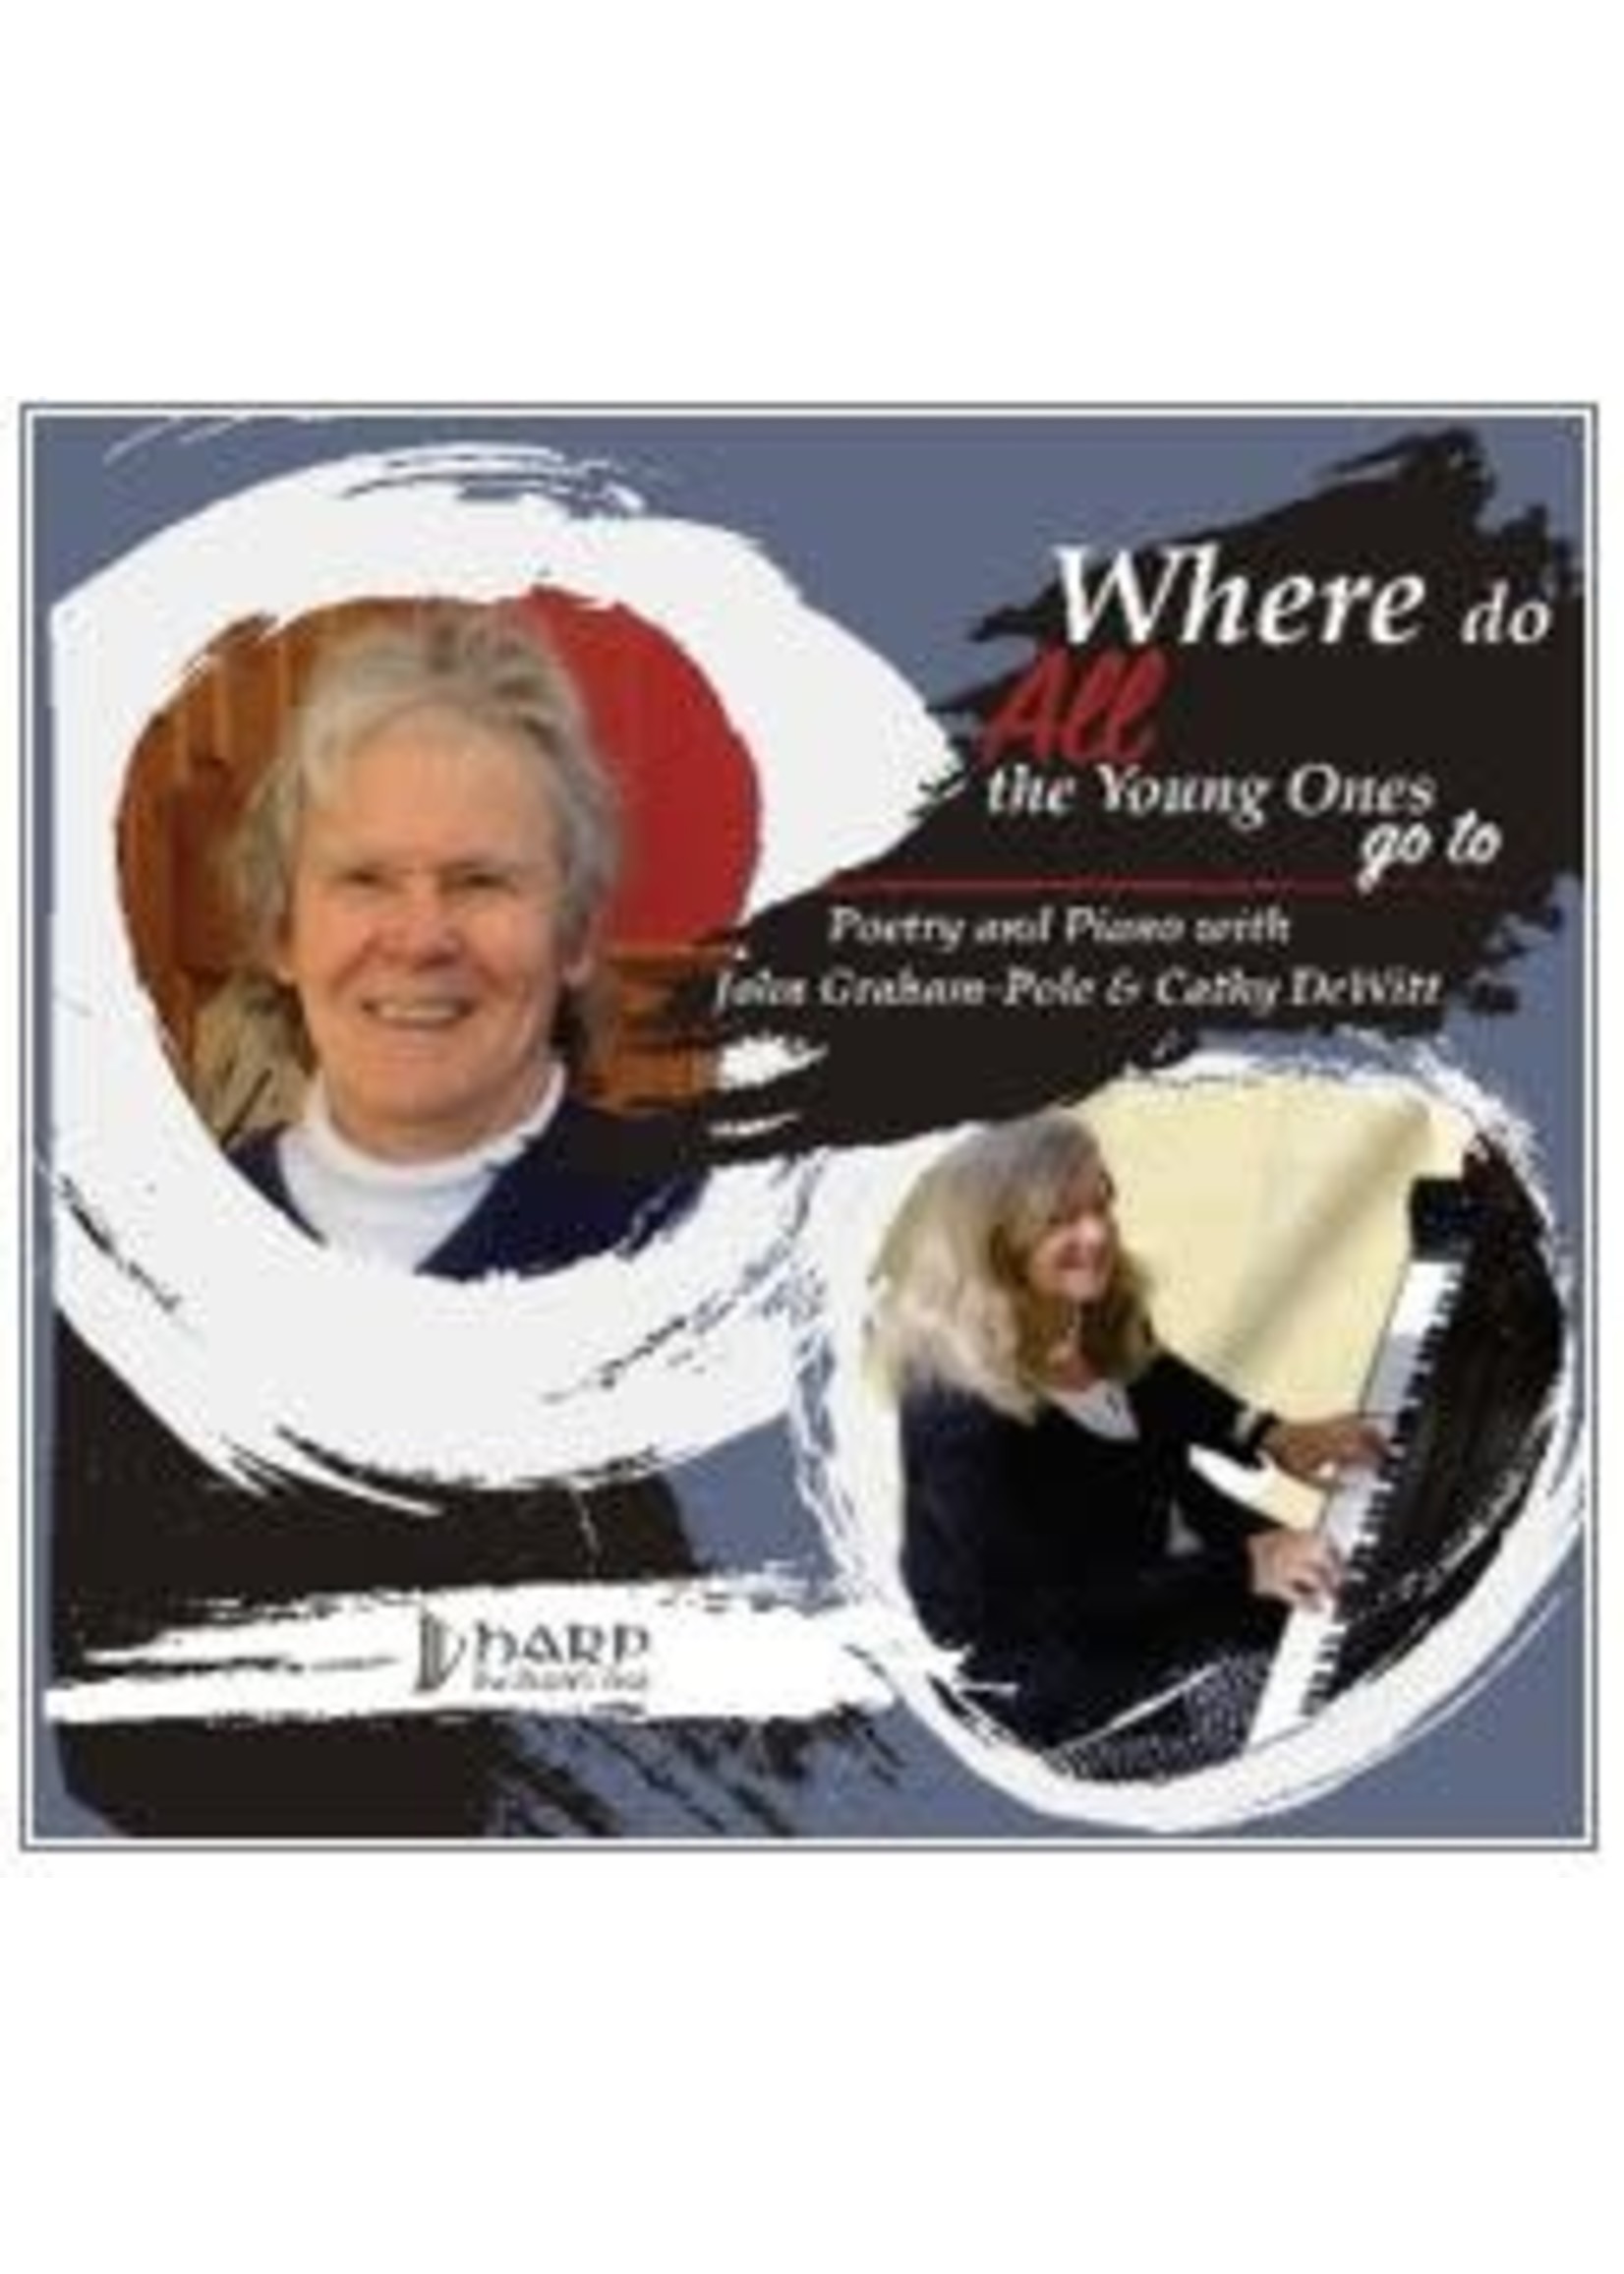 Where Do All the Young Ones Go To by John Graham-Pole, Cathy DeWitt